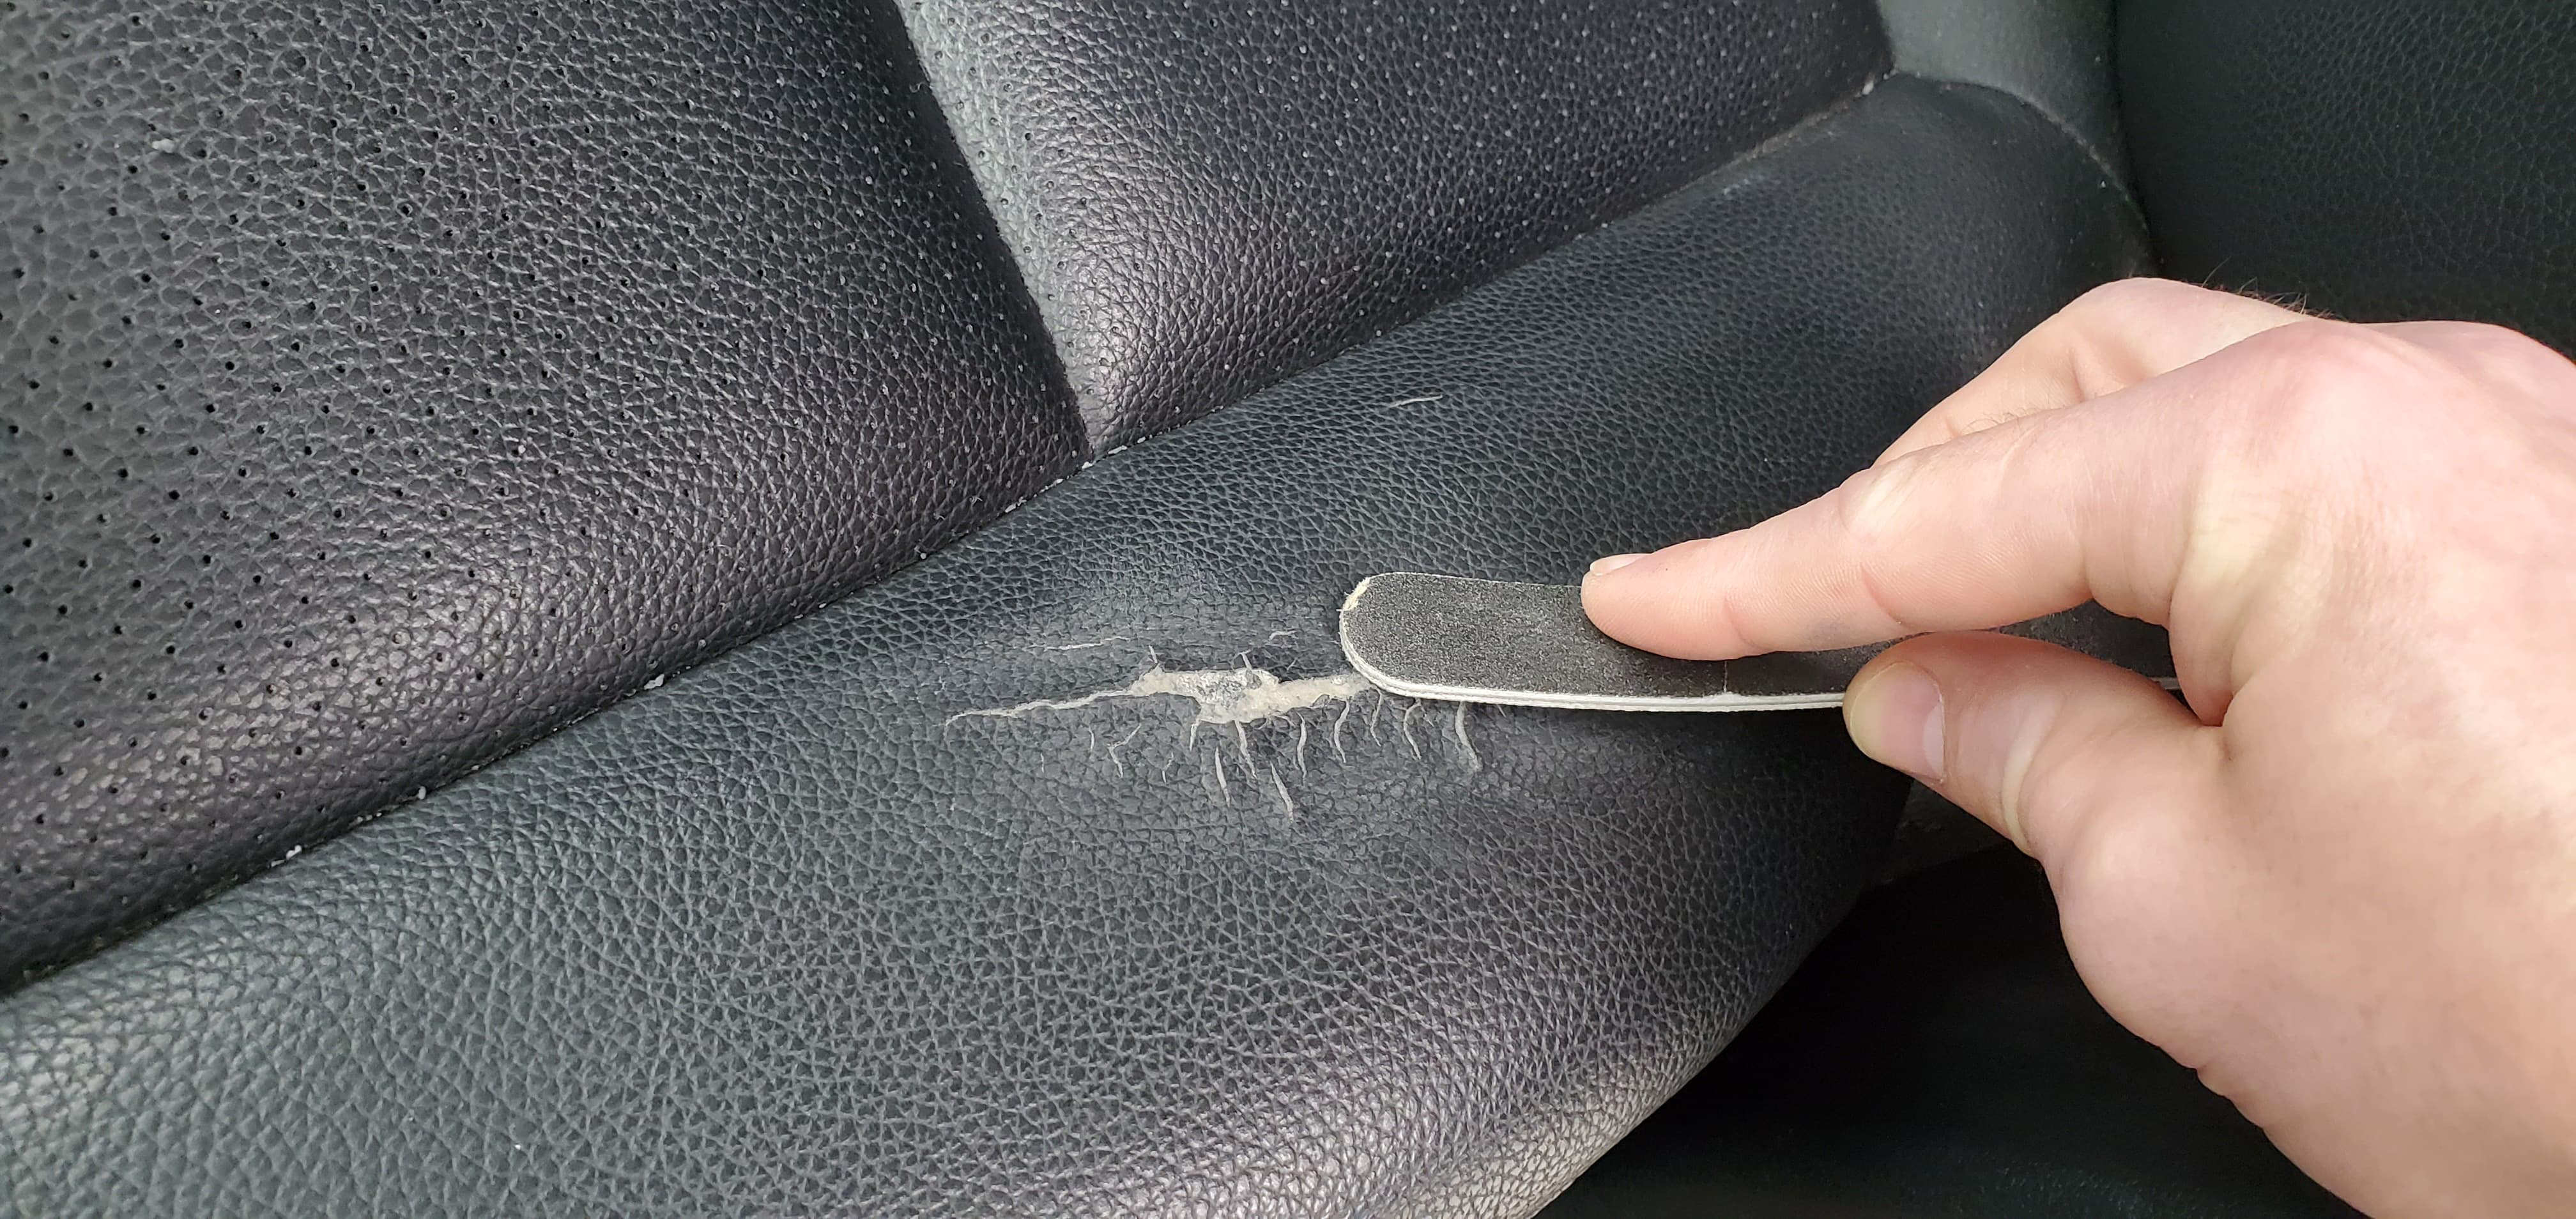 How To Repair A Leather Car Seat - How To Repair Large Hole In Leather Car Seat